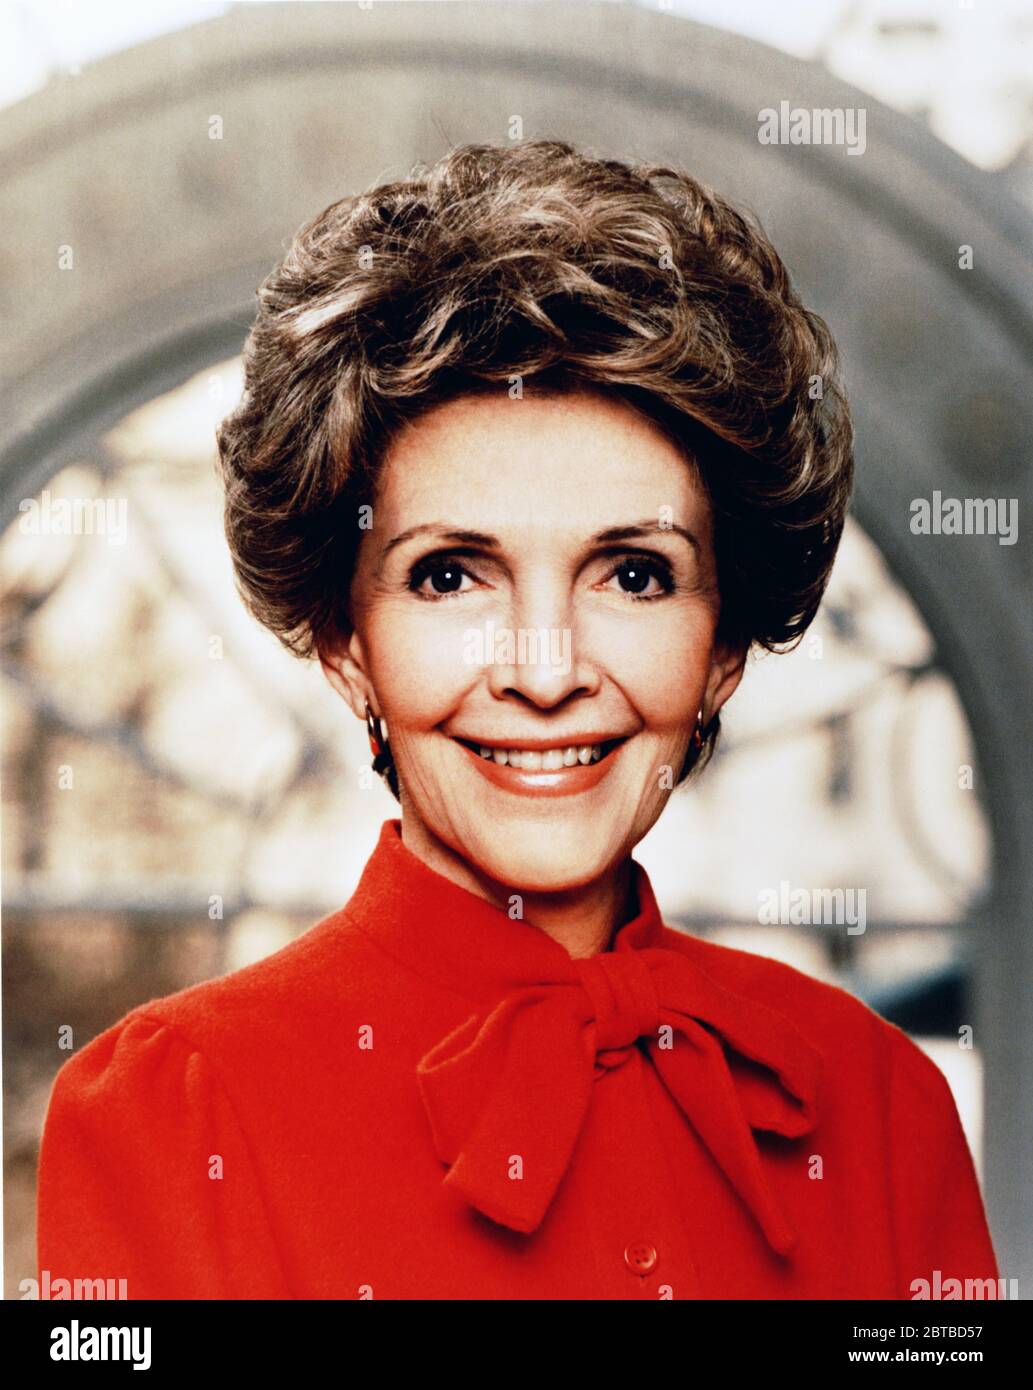 1981 , WASHINGTON  D.C. , USA : The  ex-actress and First Lady NANCY REAGAN ( Nancy Davis , 1921 - 2016 ). Photo by Official White House photographer   . Married with the 40Th United States of America President RONALD REAGAN ( 1911 - 2004 ) in charge from 1981 to 1989 . In this photo just after the Inaugural Parade in Washington, D.C. on Inauguration Day, 1981 .  - First Lady of the United States -  POLITICO - POLITICIAN - POLITICA - POLITIC -  USA - ritratto - portrait  - abito vestito rosso -  red  dress - PRESIDENTE DELLA REPUBBLICA DEGLI STATI UNITI D'AMERICA ---- Archivio GBB Stock Photo